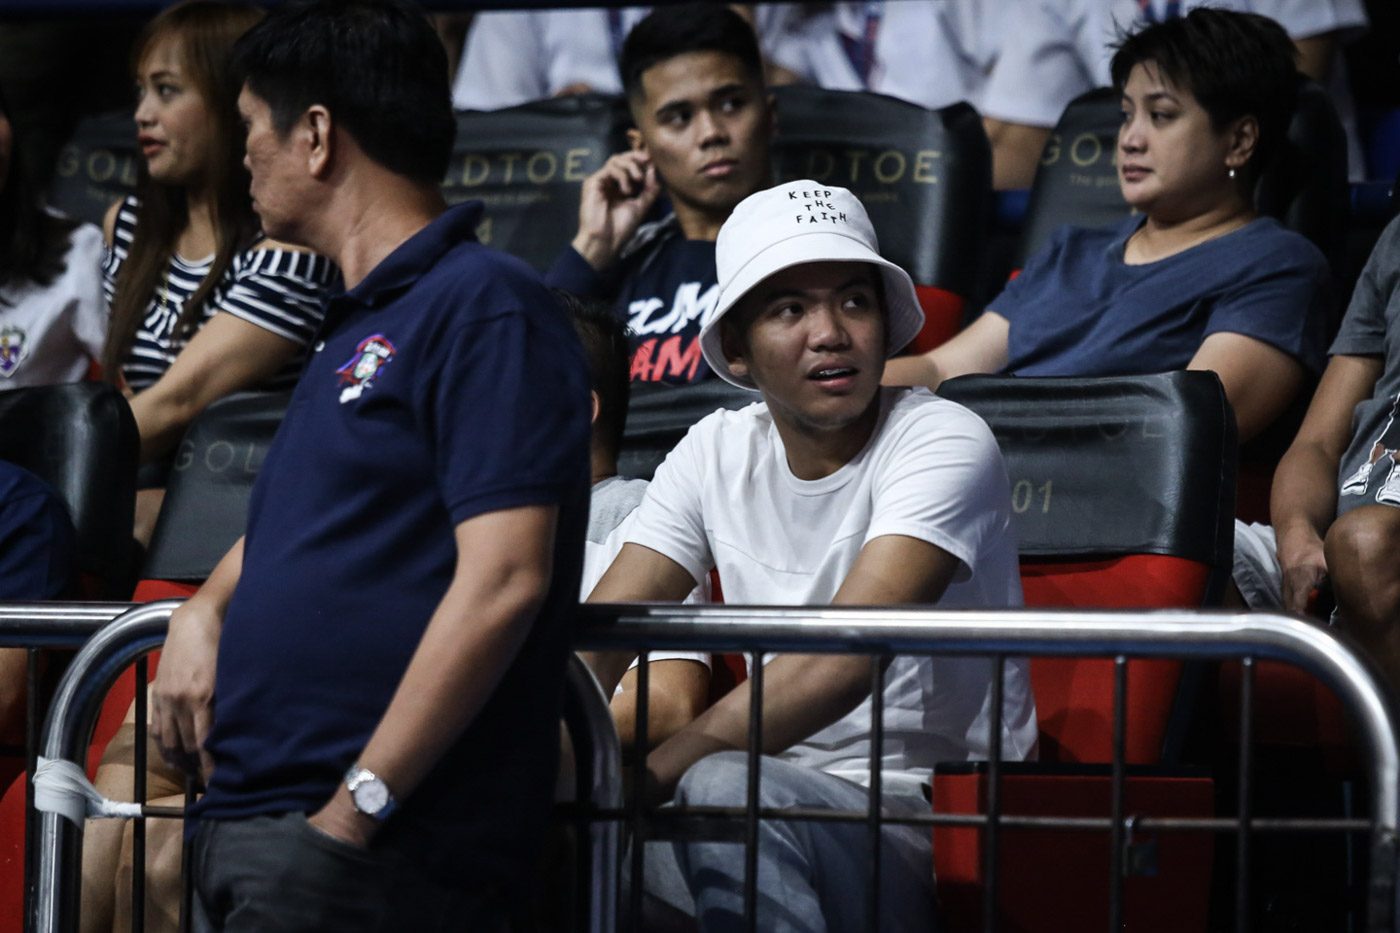 Balanza proves to be Letran’s lucky charm in unlikely win